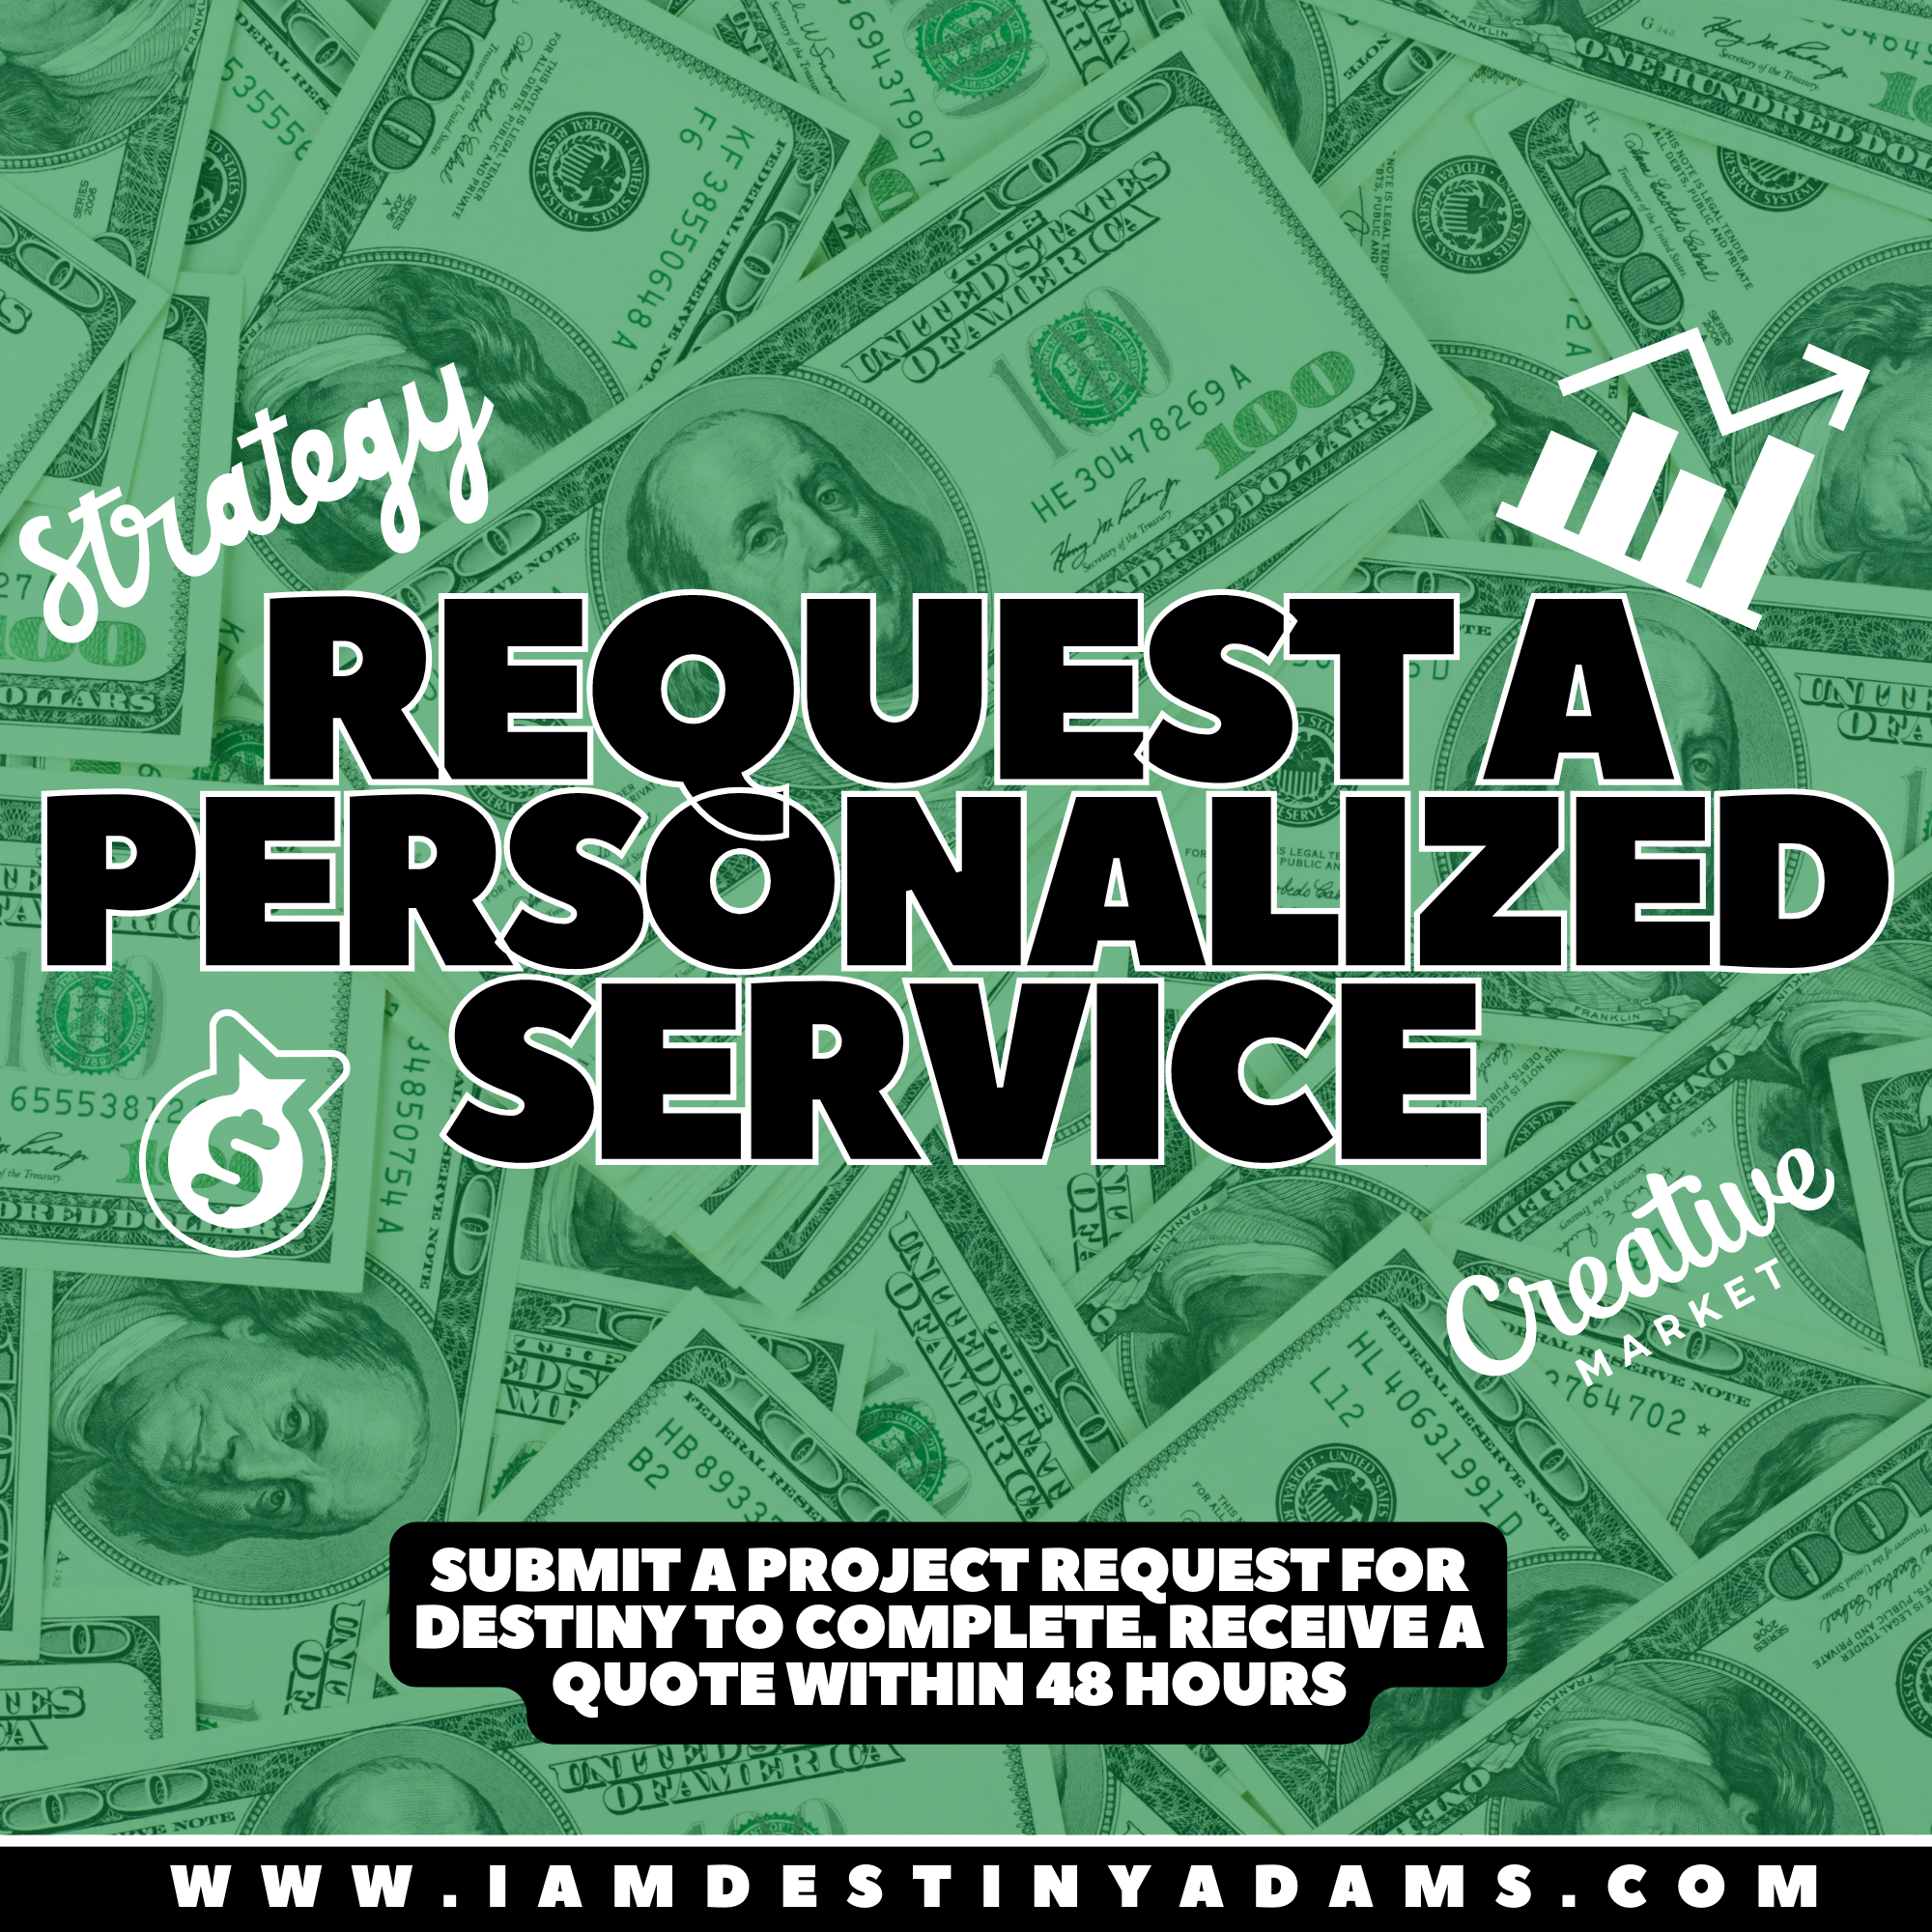 Request A Personalized Service